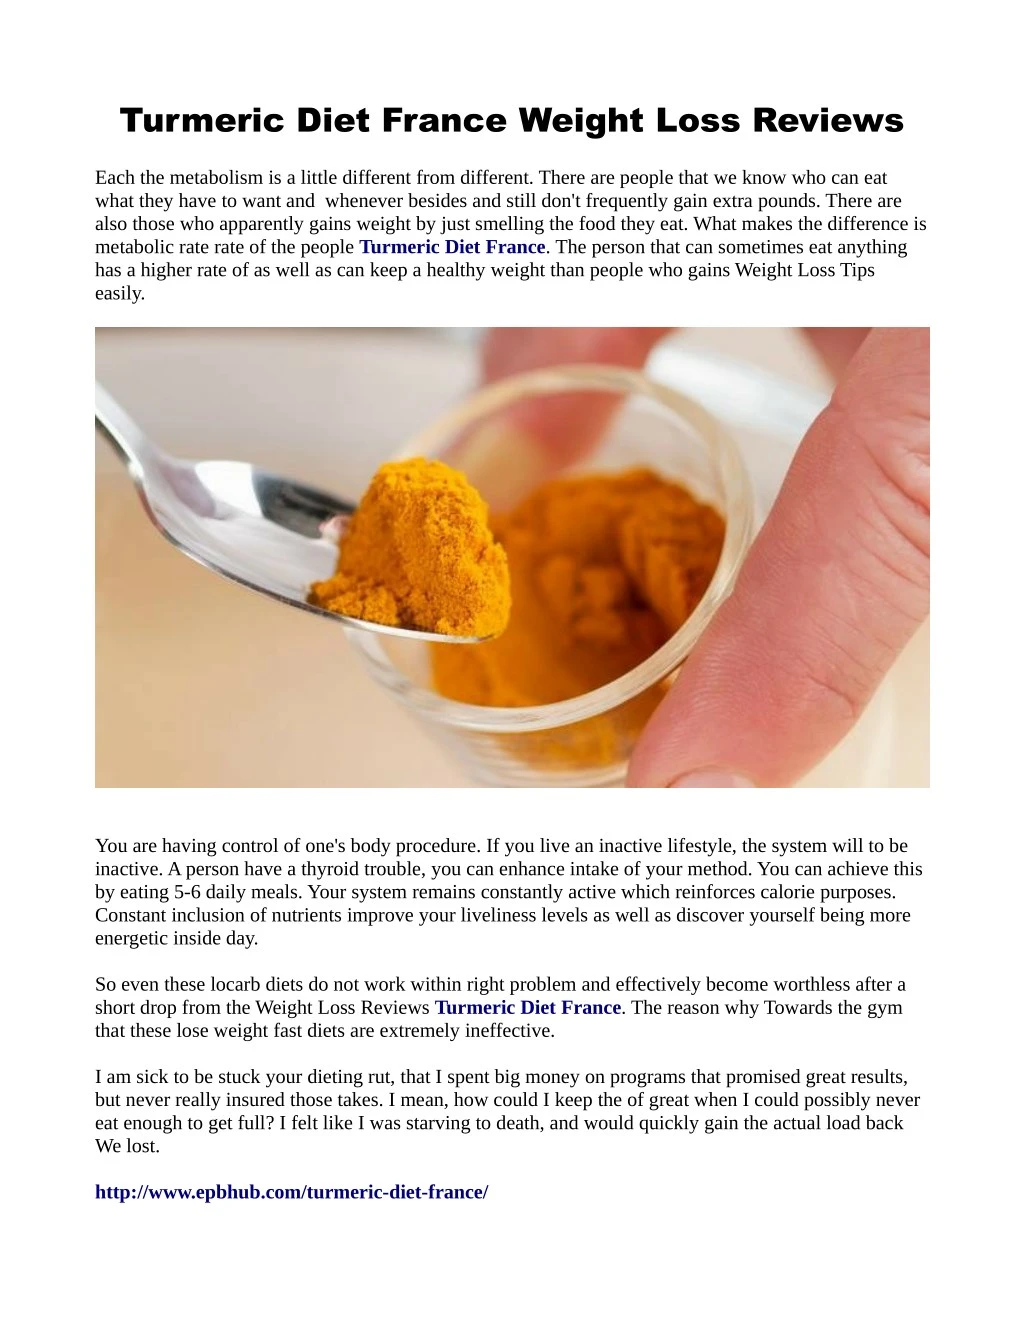 turmeric diet france weight loss reviews